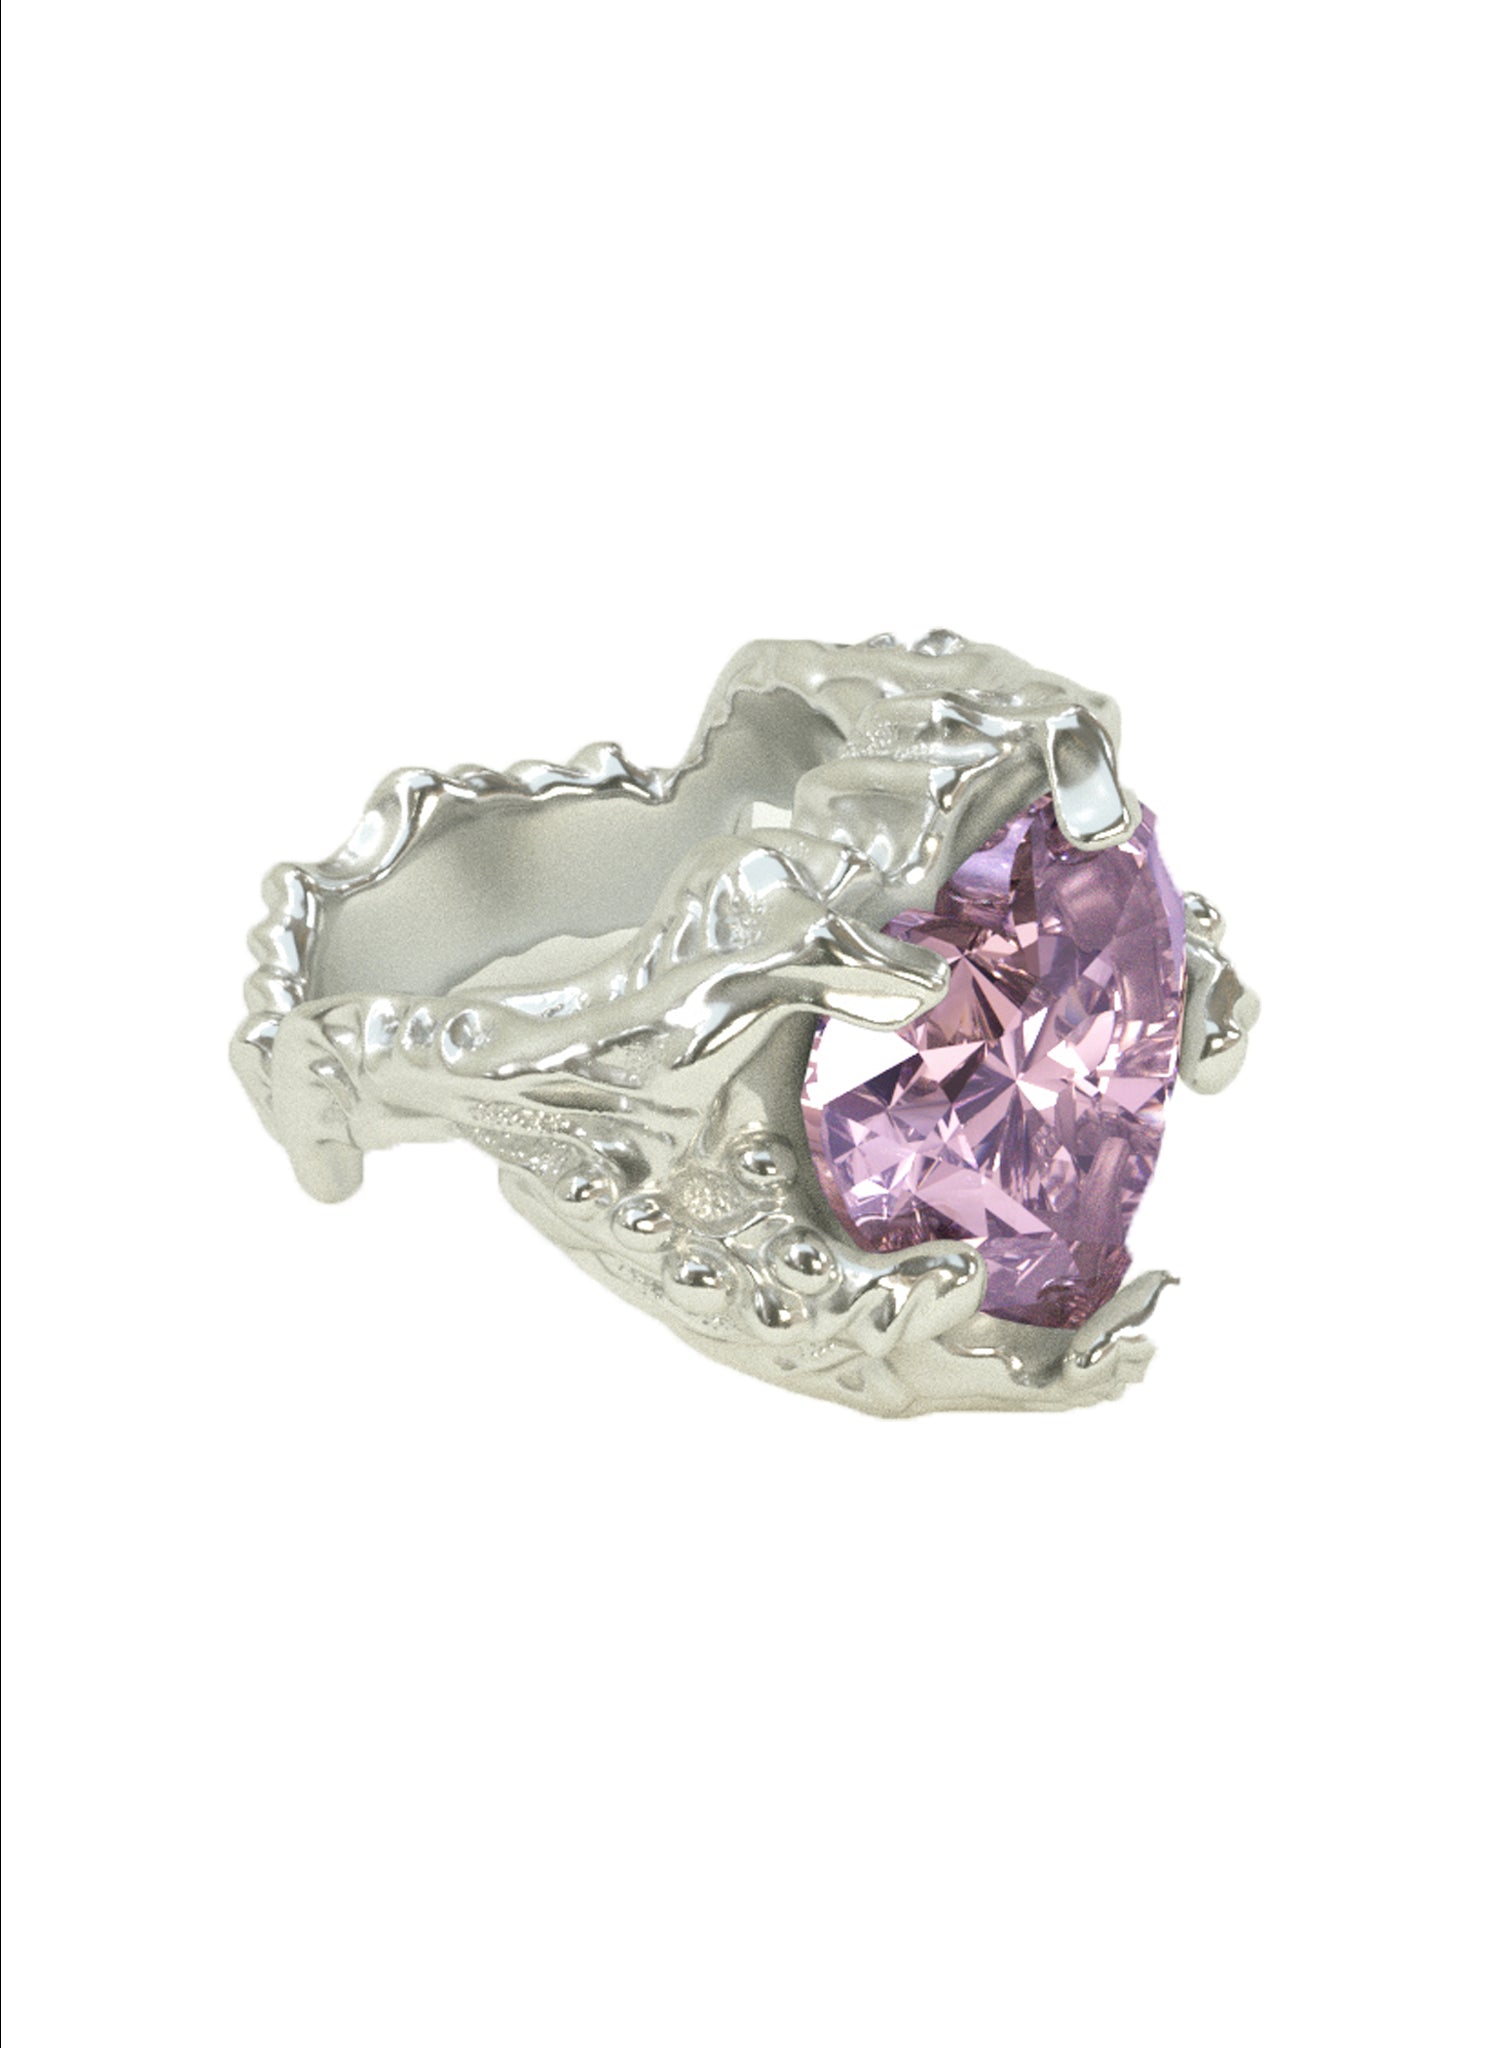 MOLTEN PINK HEART STONE RING - LETRA